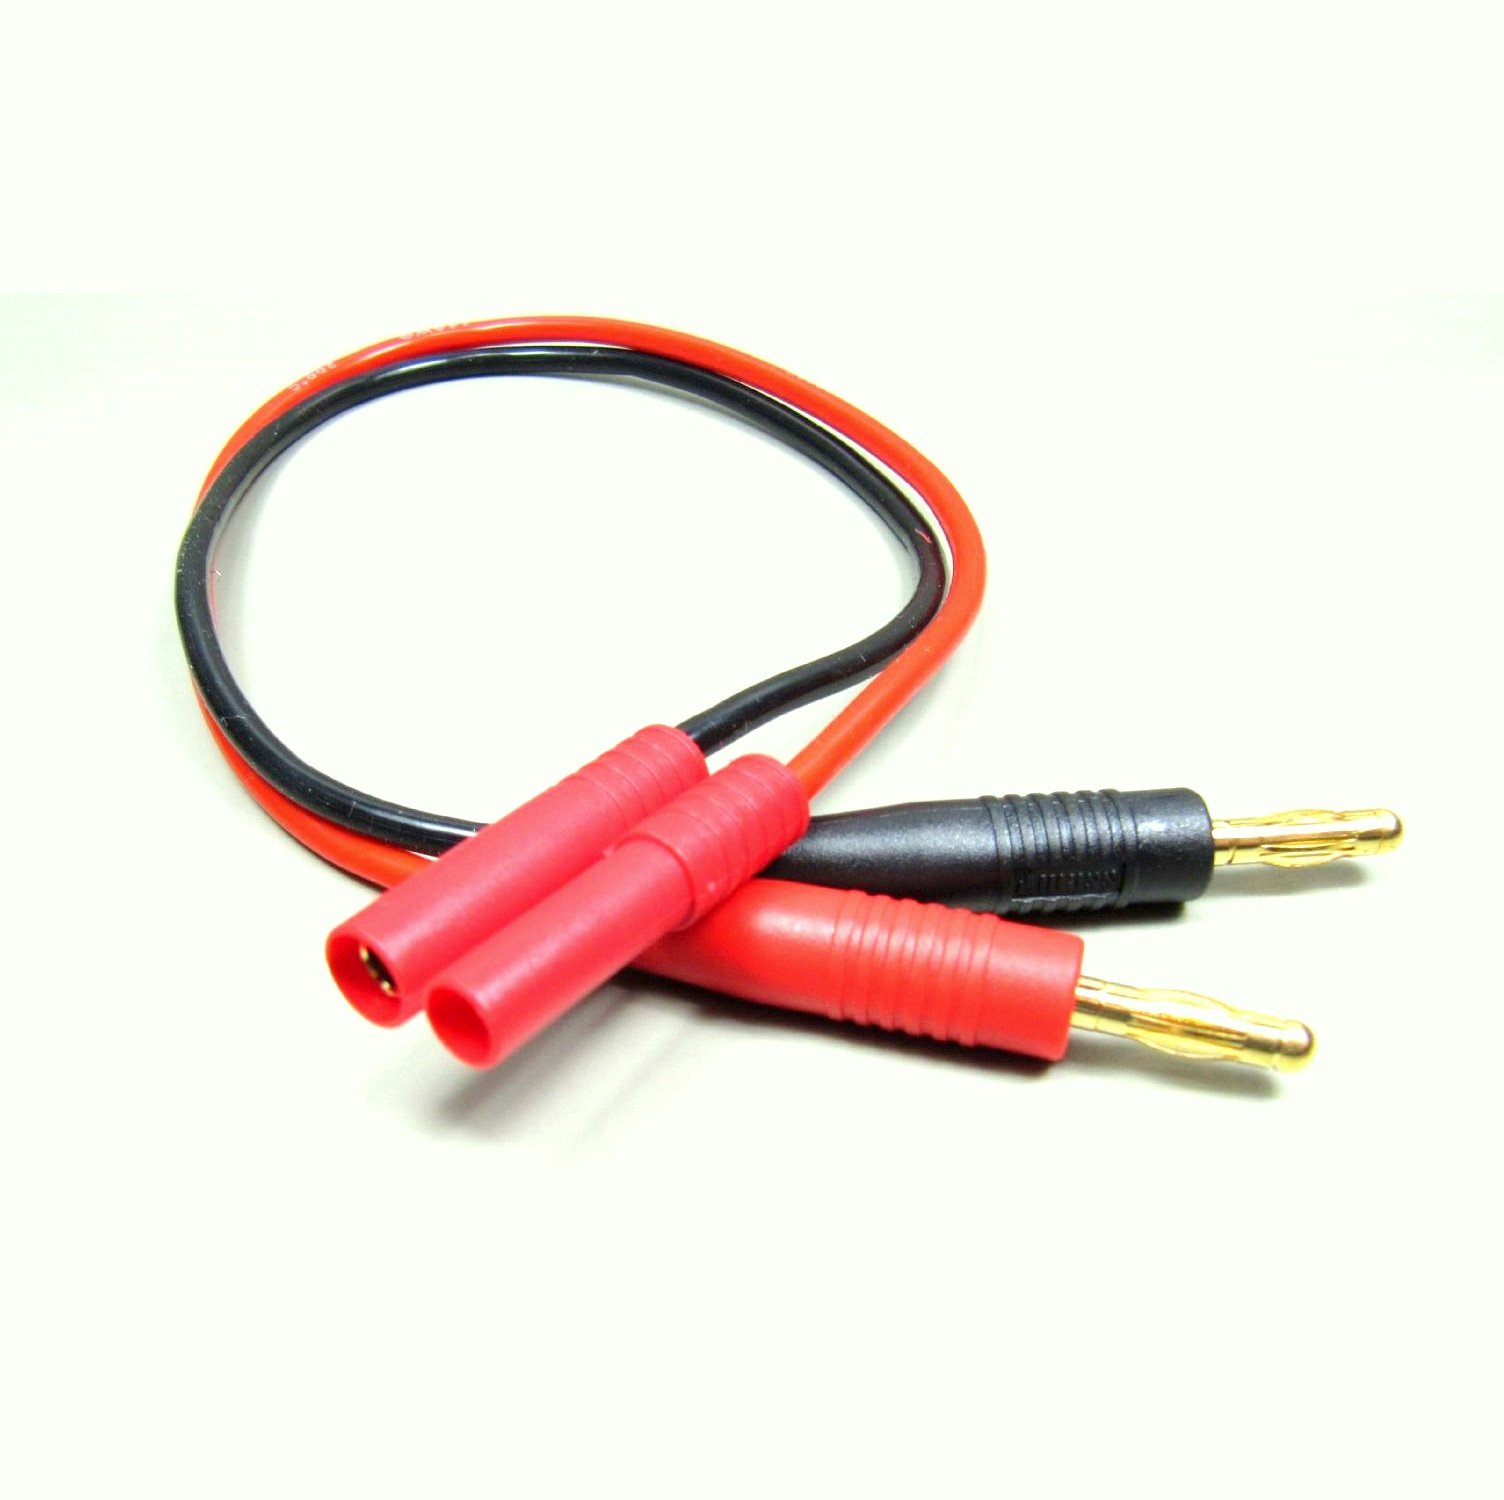 Safeconnect Hxt 4Mm To Banana Plug Charge Lead Adapter